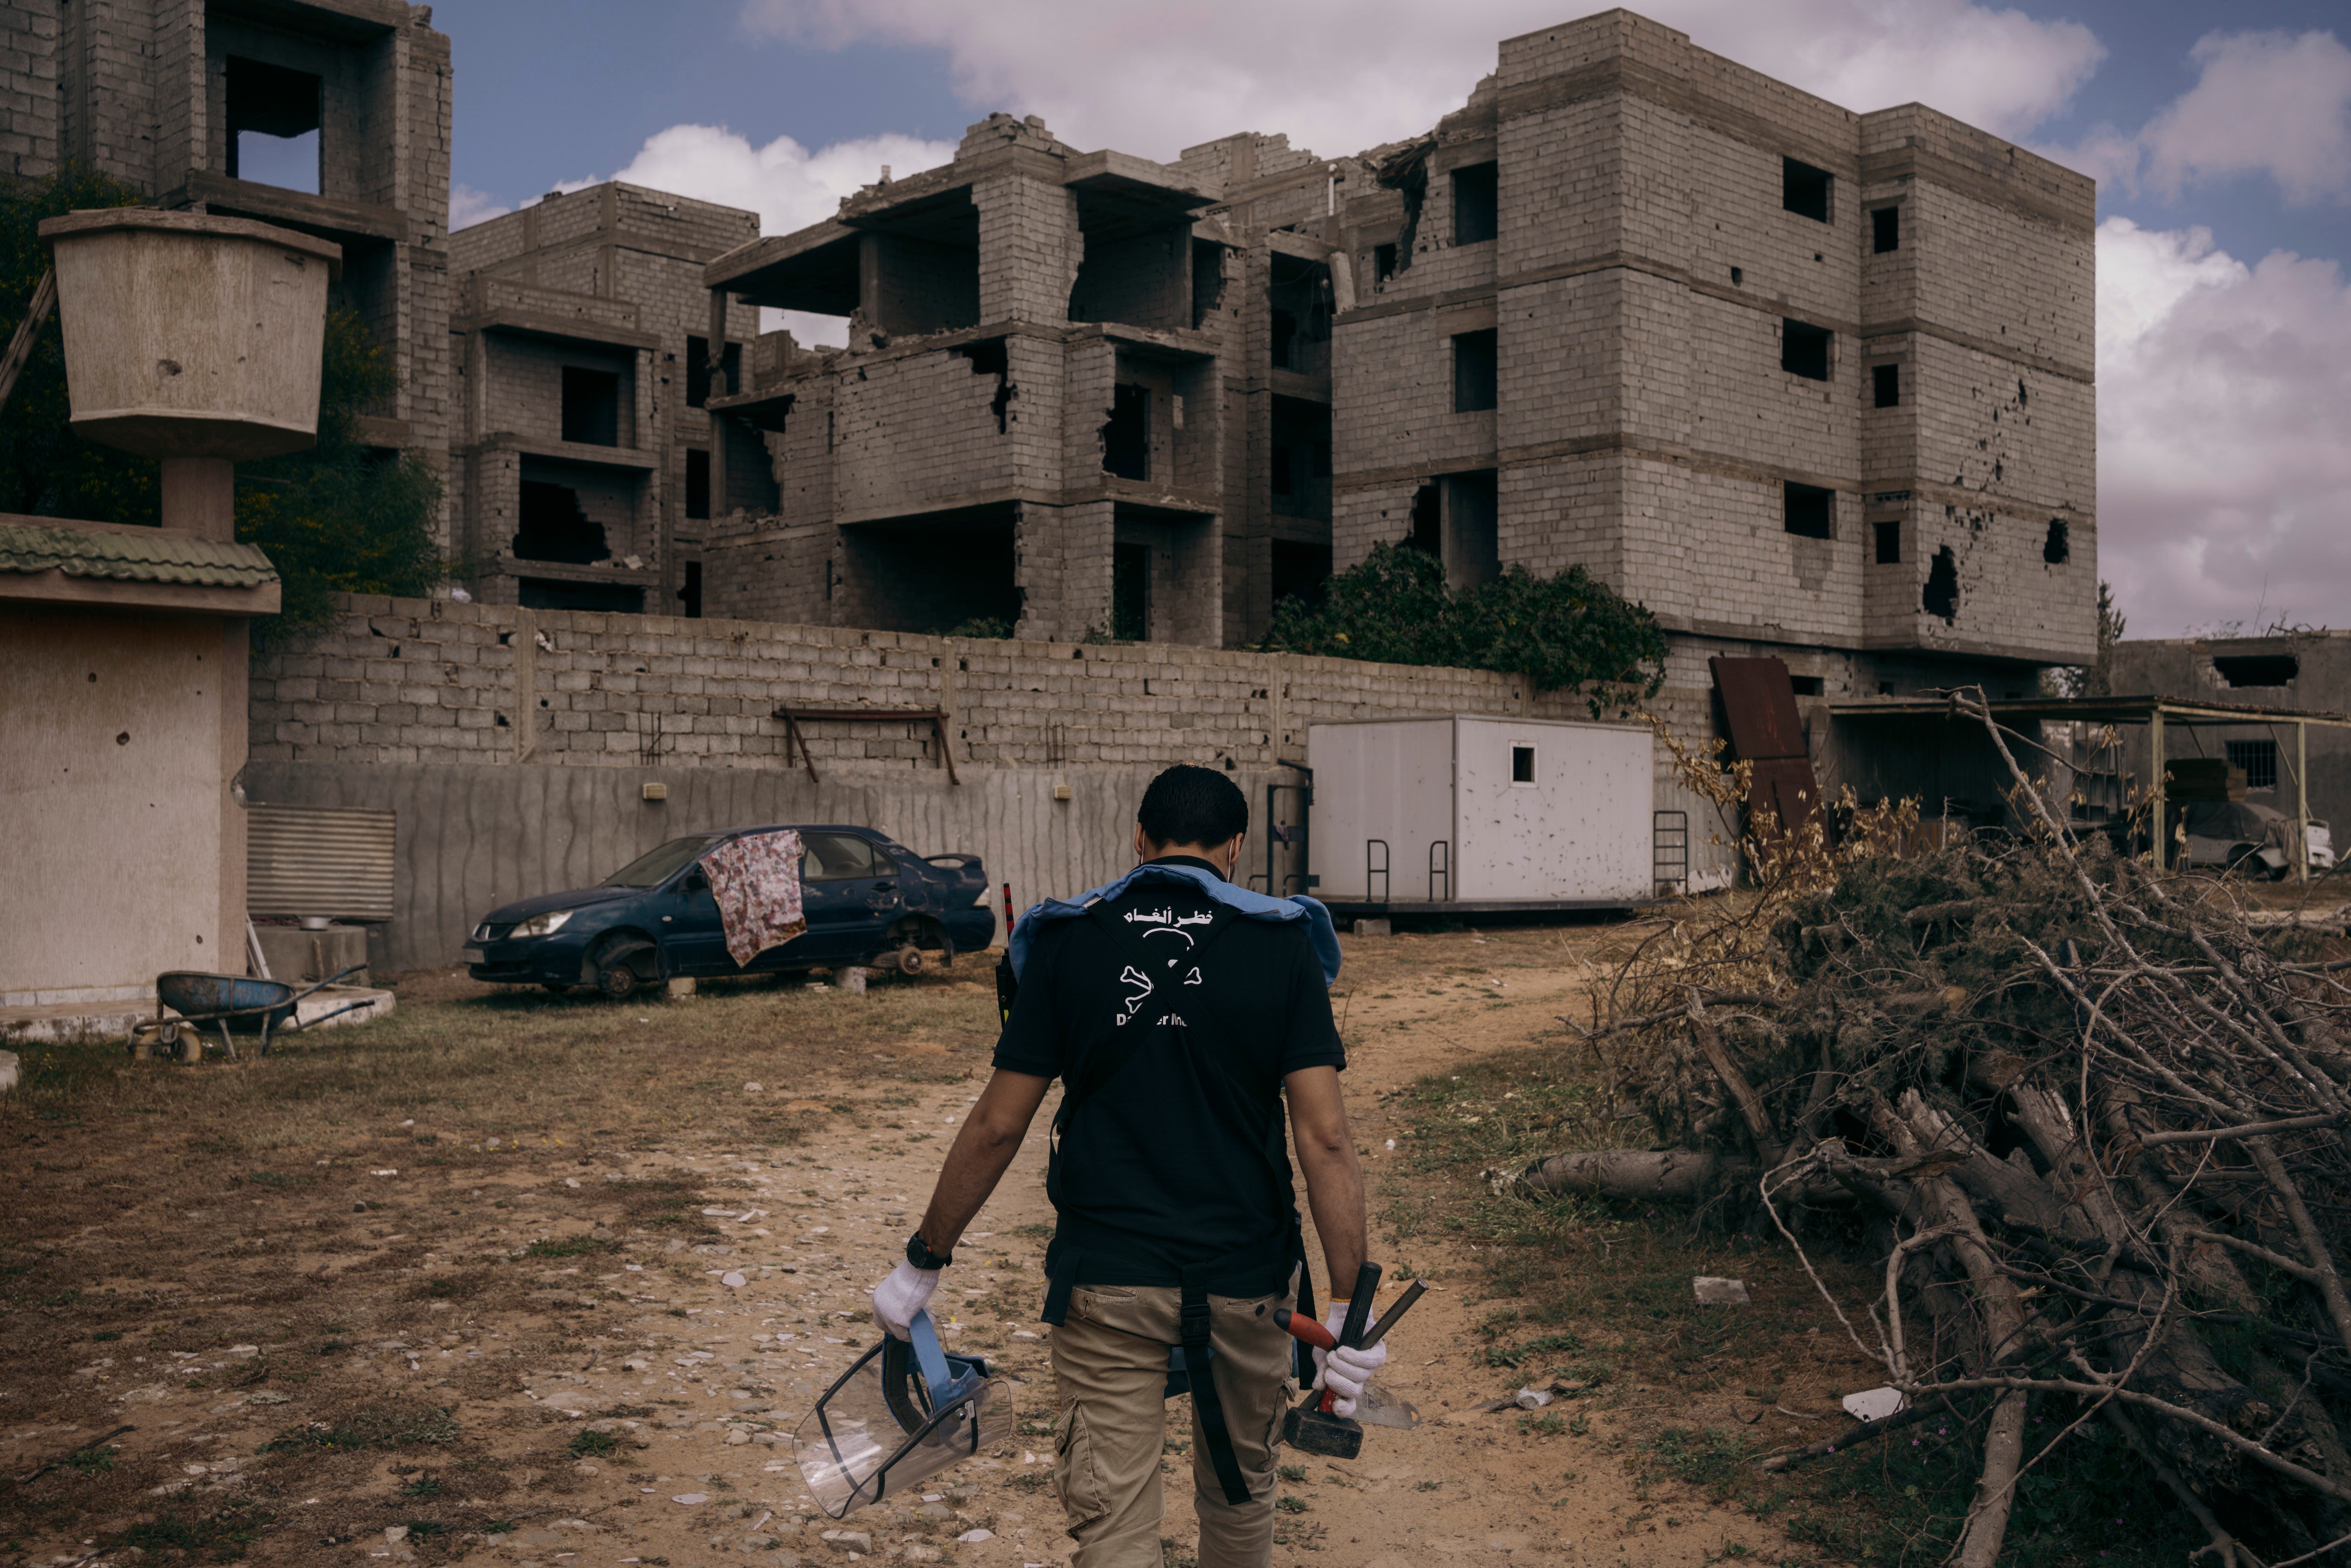 Mohammed Zlateni approaches the area where an unexploded artillery shell is buried near a house in Tripoli